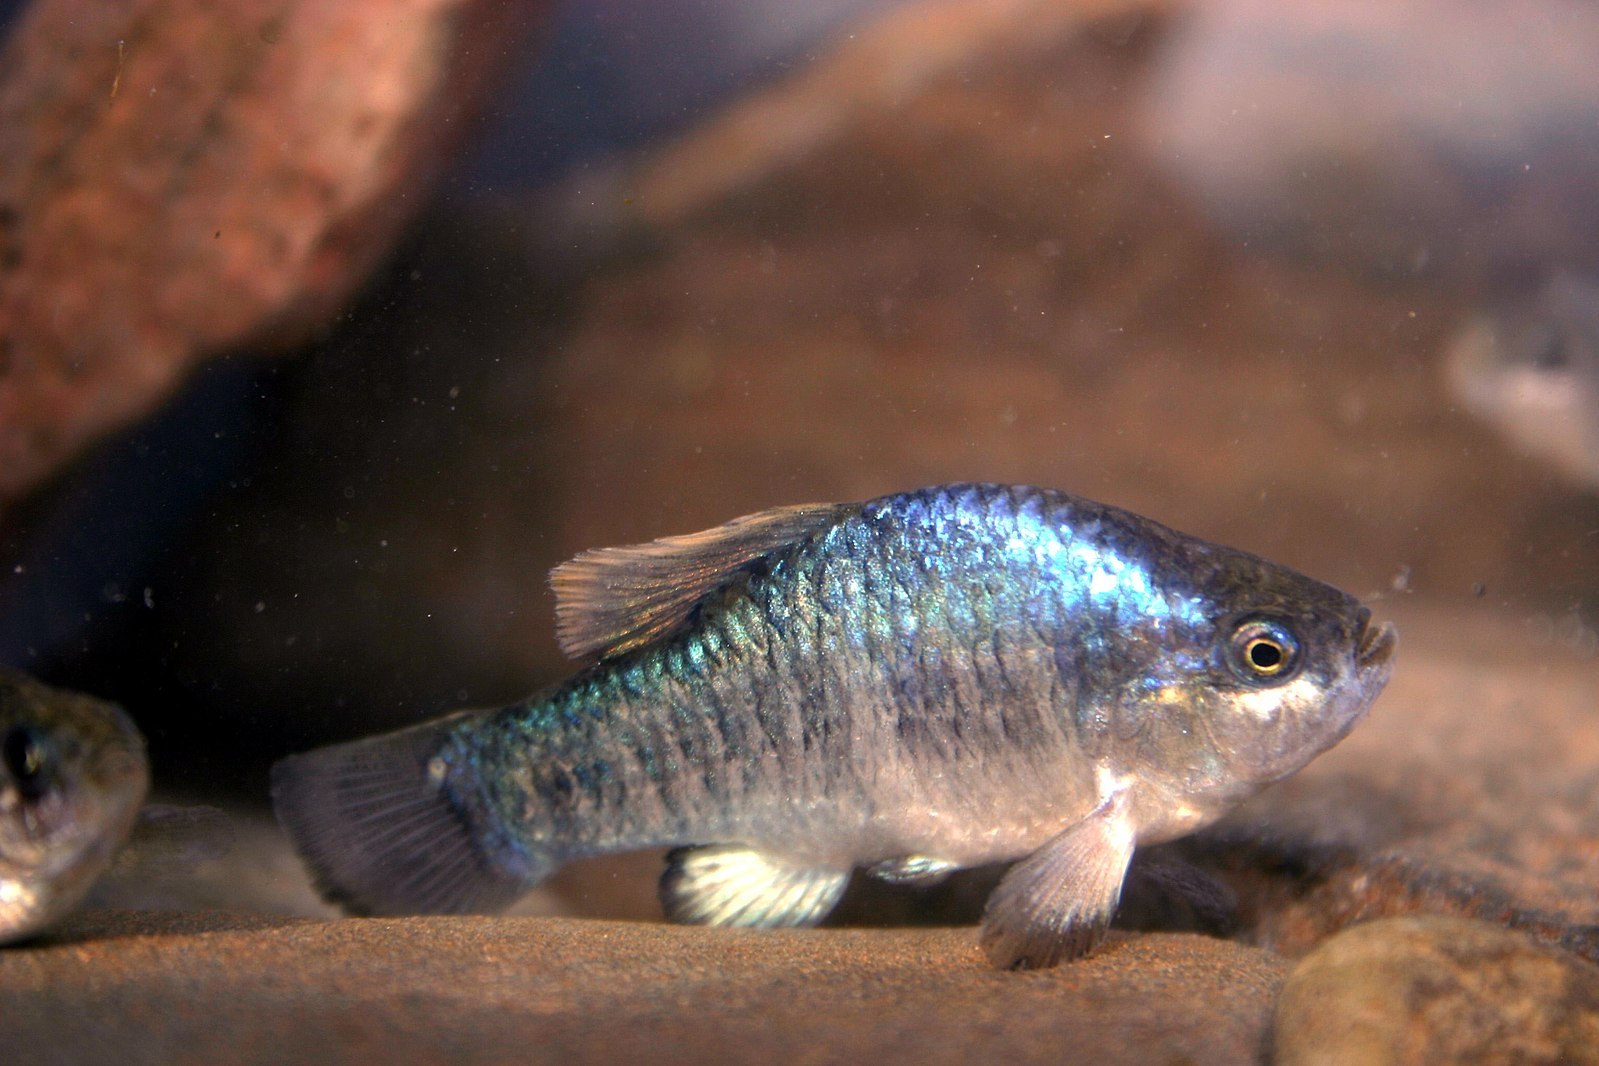 Owens Pupfish is small with metallic blue and green scales